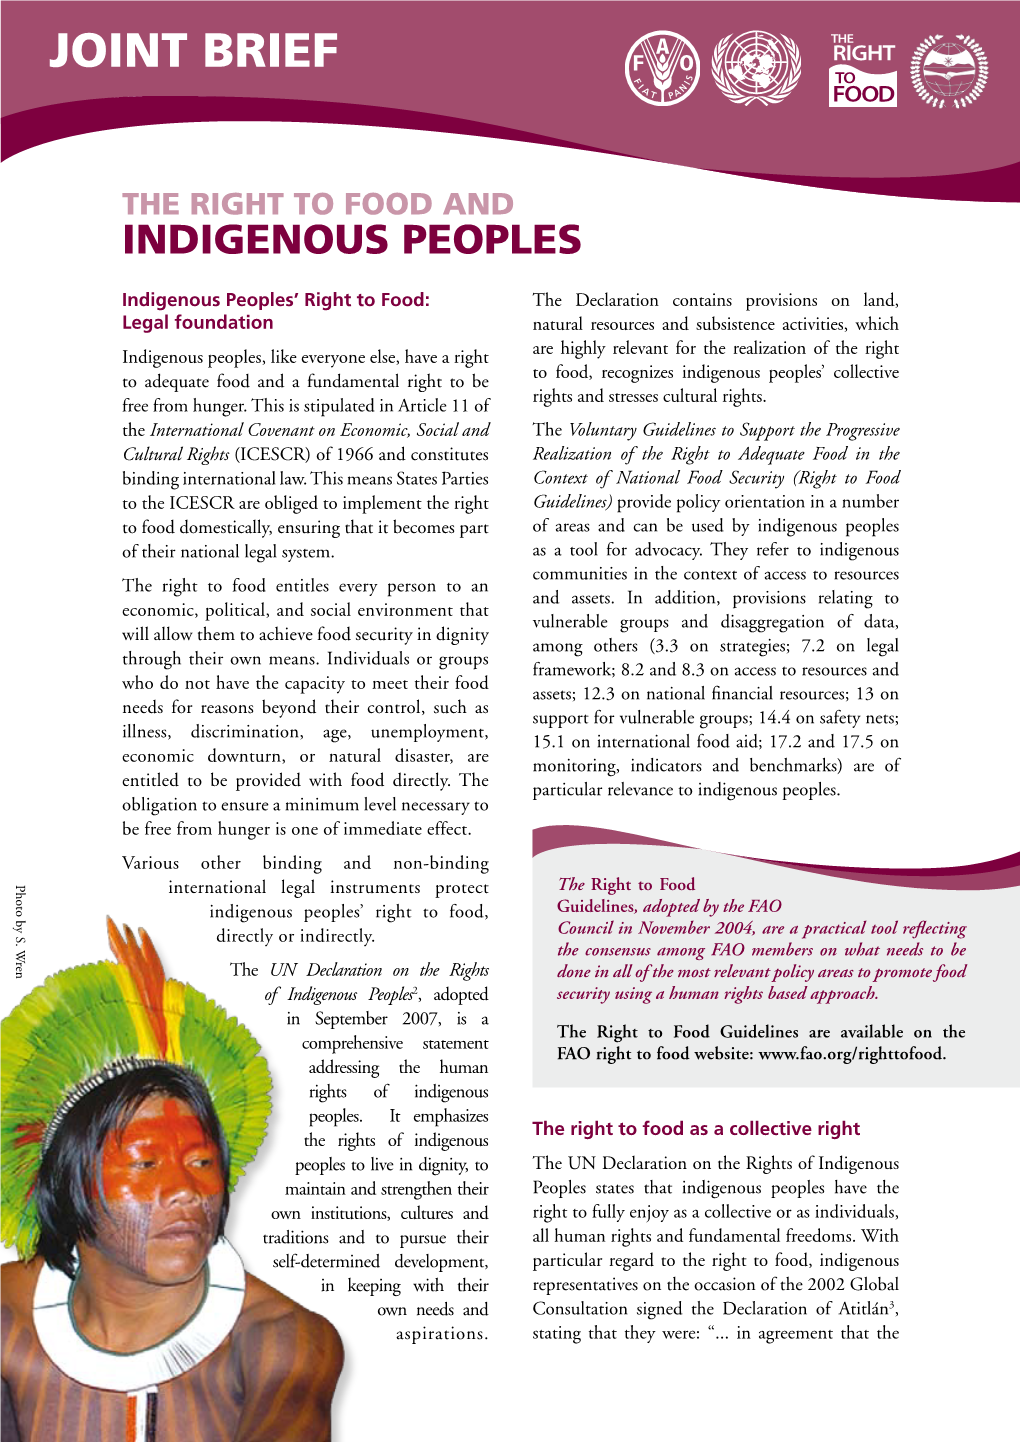 The Right to Food. Indigenous Peoples Realisation of Right to Food